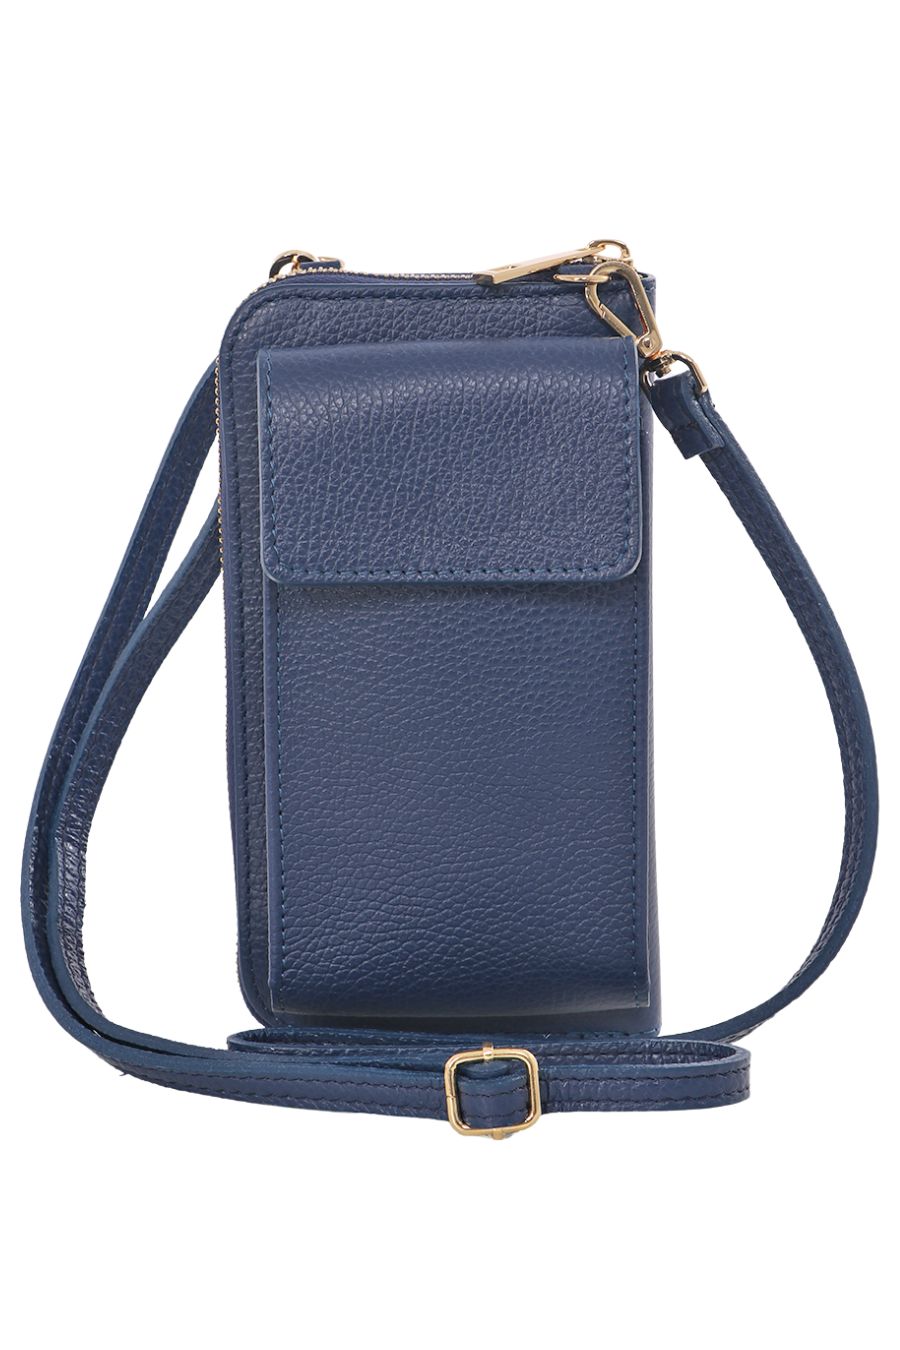 Navy Blue Genuine Italian Leather Mobile Phone Wallet Combo Bag